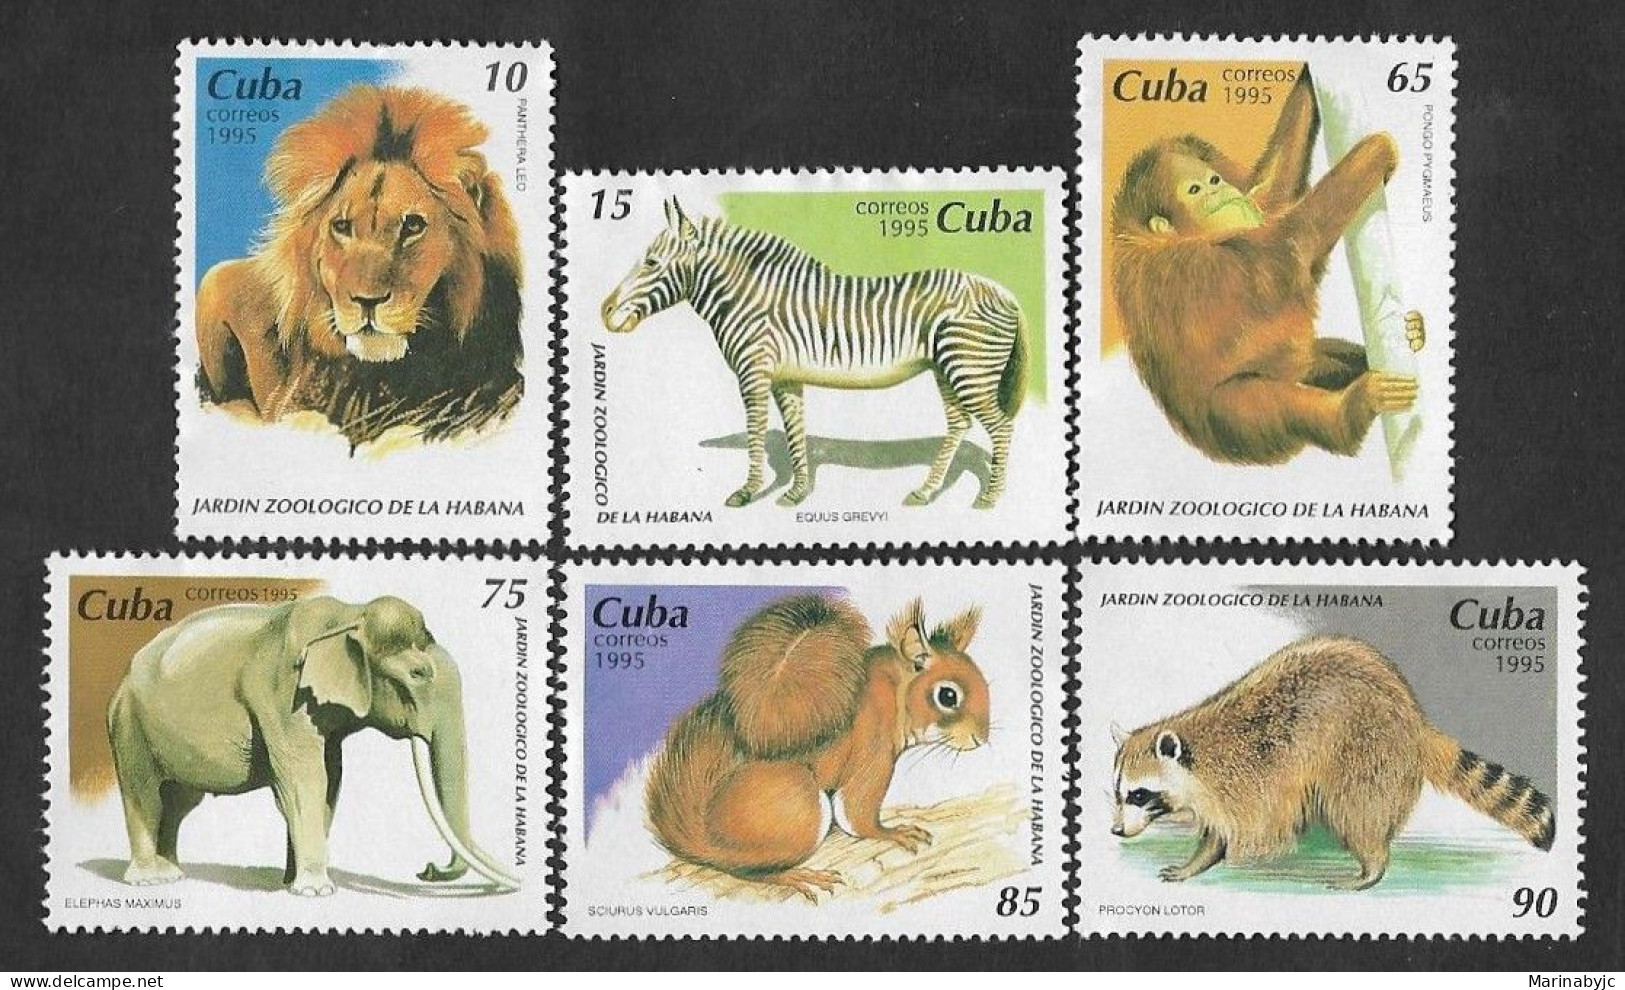 SE)1995 CUBA, ANIMALS OF THE HAVANA ZOOLOGICAL GARDEN, 6 STAMPS MNH - Unused Stamps